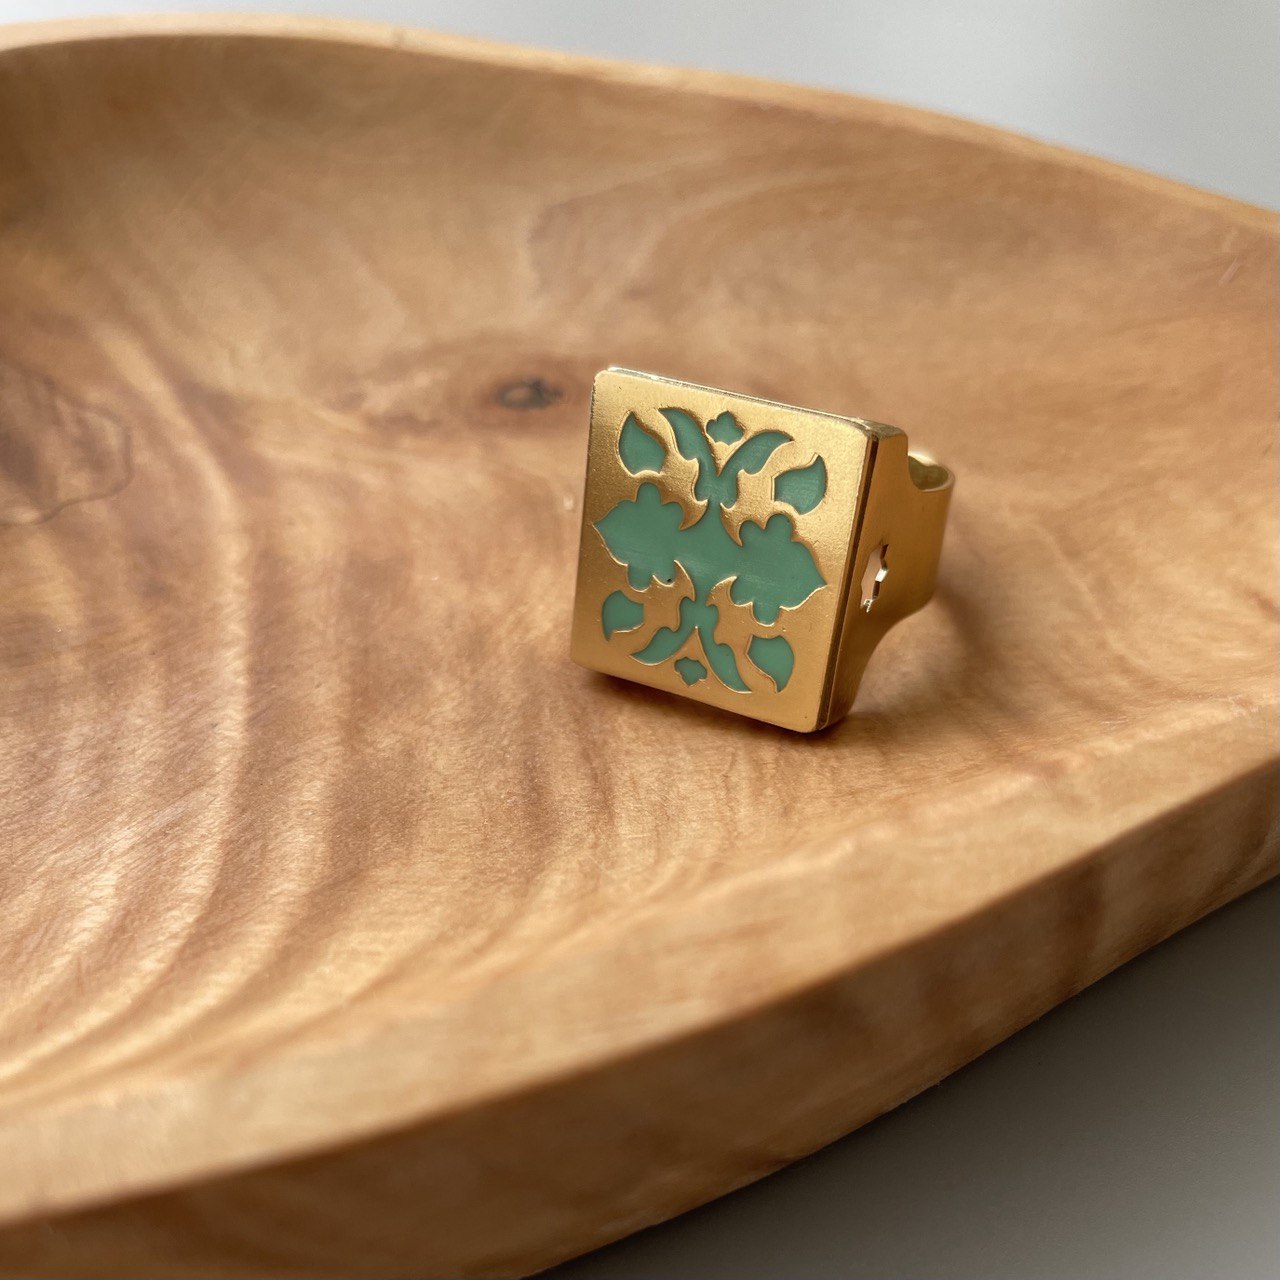 Persian Rings-Persian Brass Square Ring with Turquoise Blue Pattern: Persian Jewelry-AFRA ART GALLERY